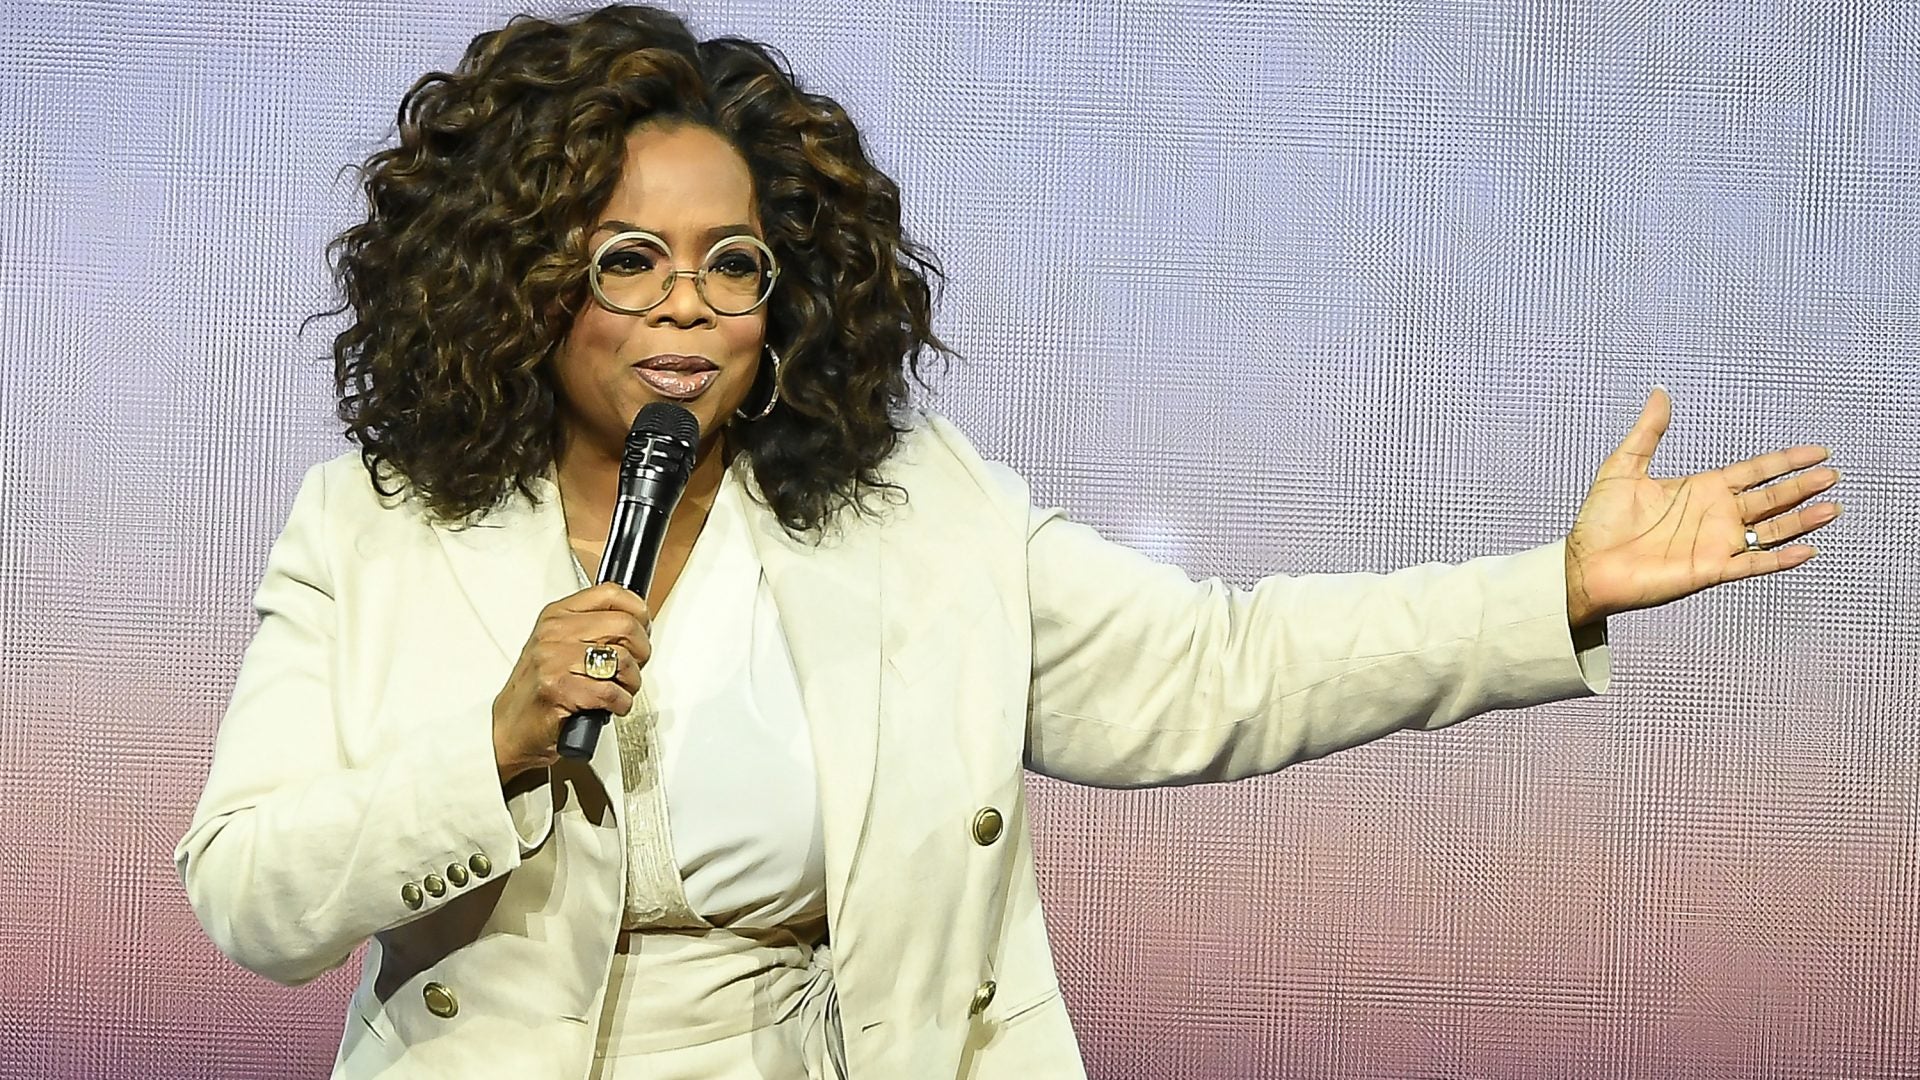 Oprah Winfrey's Iconic Talk Show Will Now Be Available As A Podcast